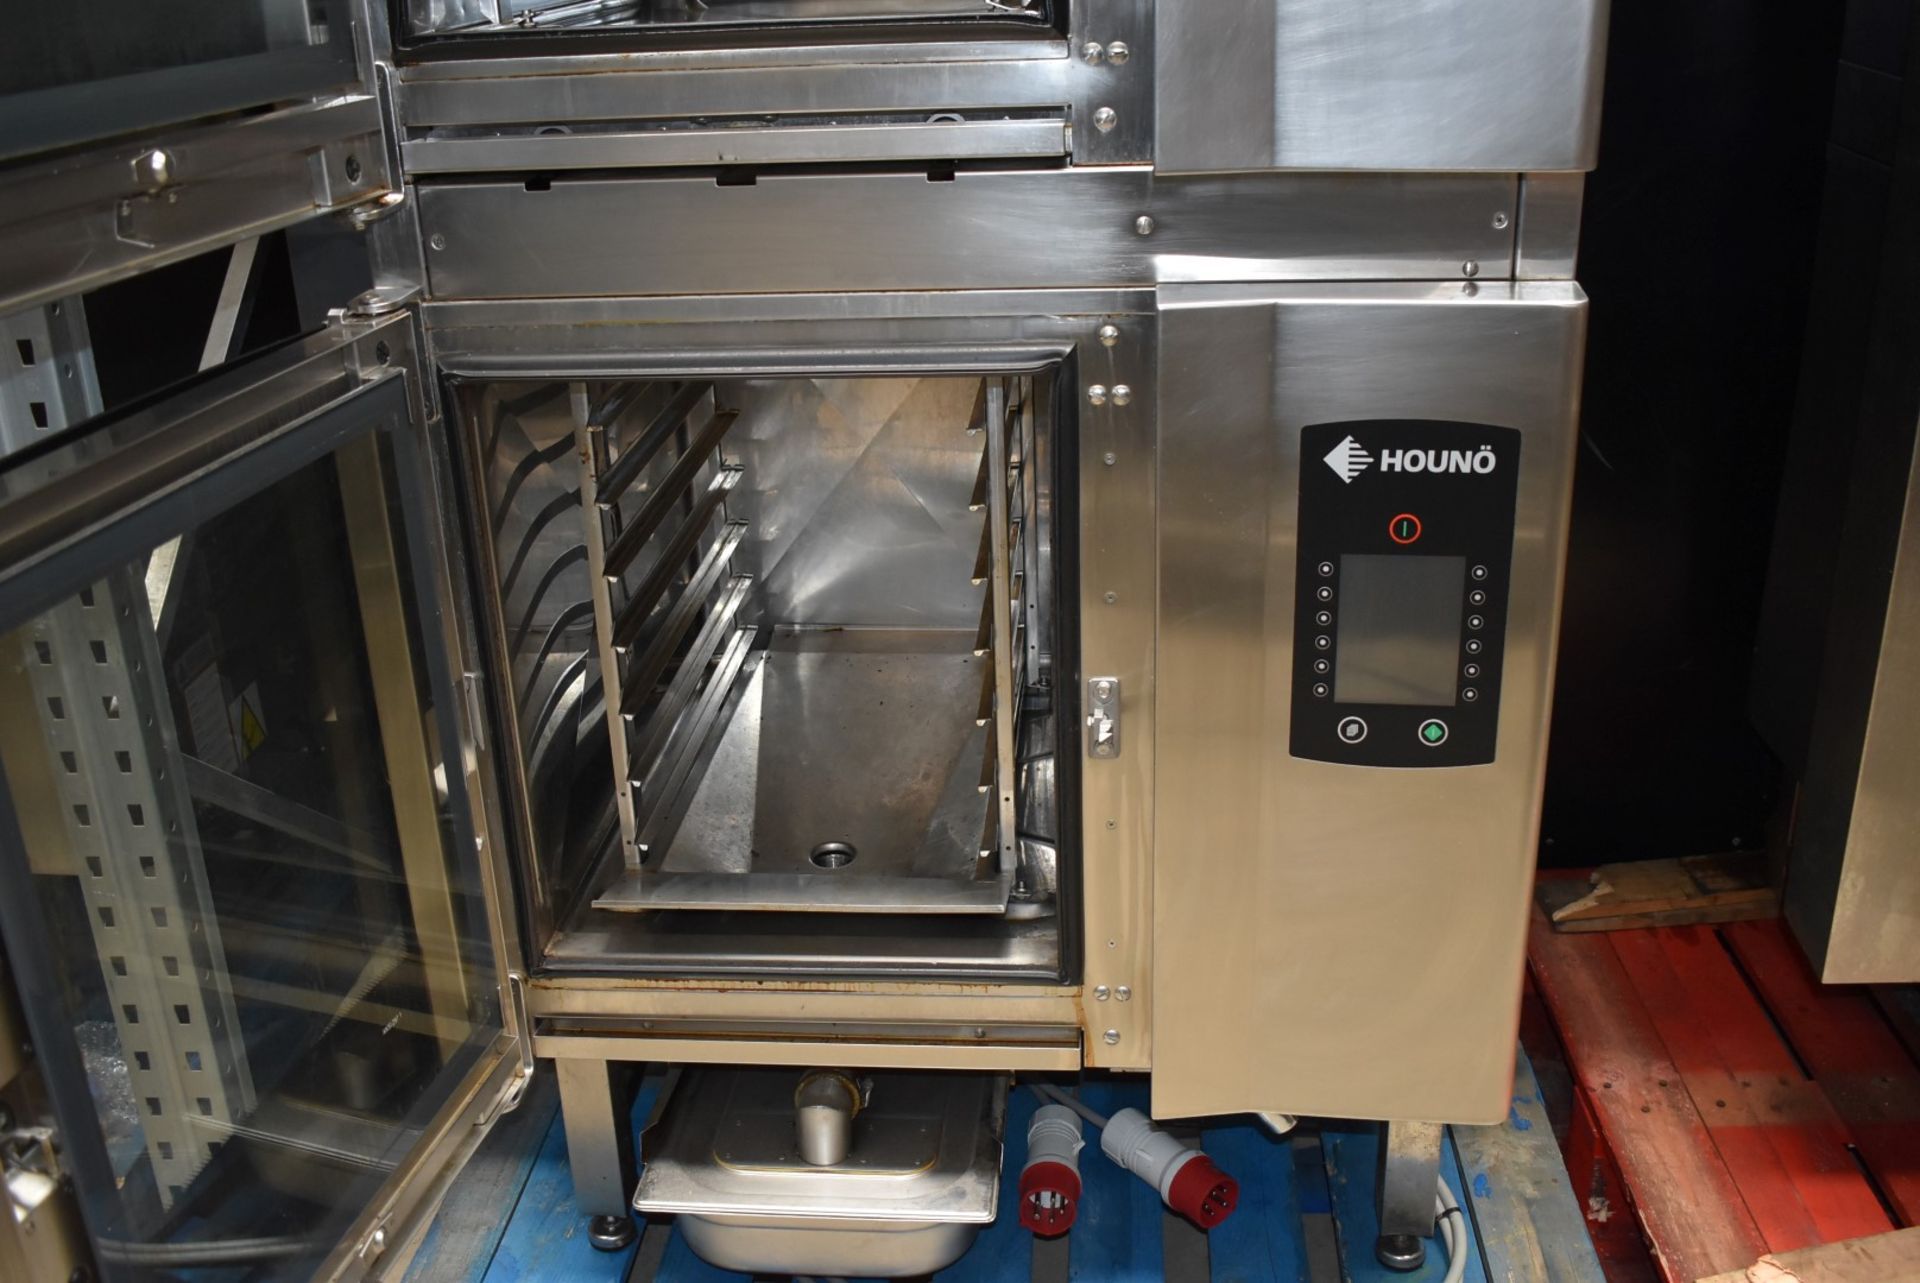 1 x Houno Double 6 Grid Stacked Combi Oven - Model: C 1.06 / CPE 1.06 - 3 Phase - Image 3 of 21